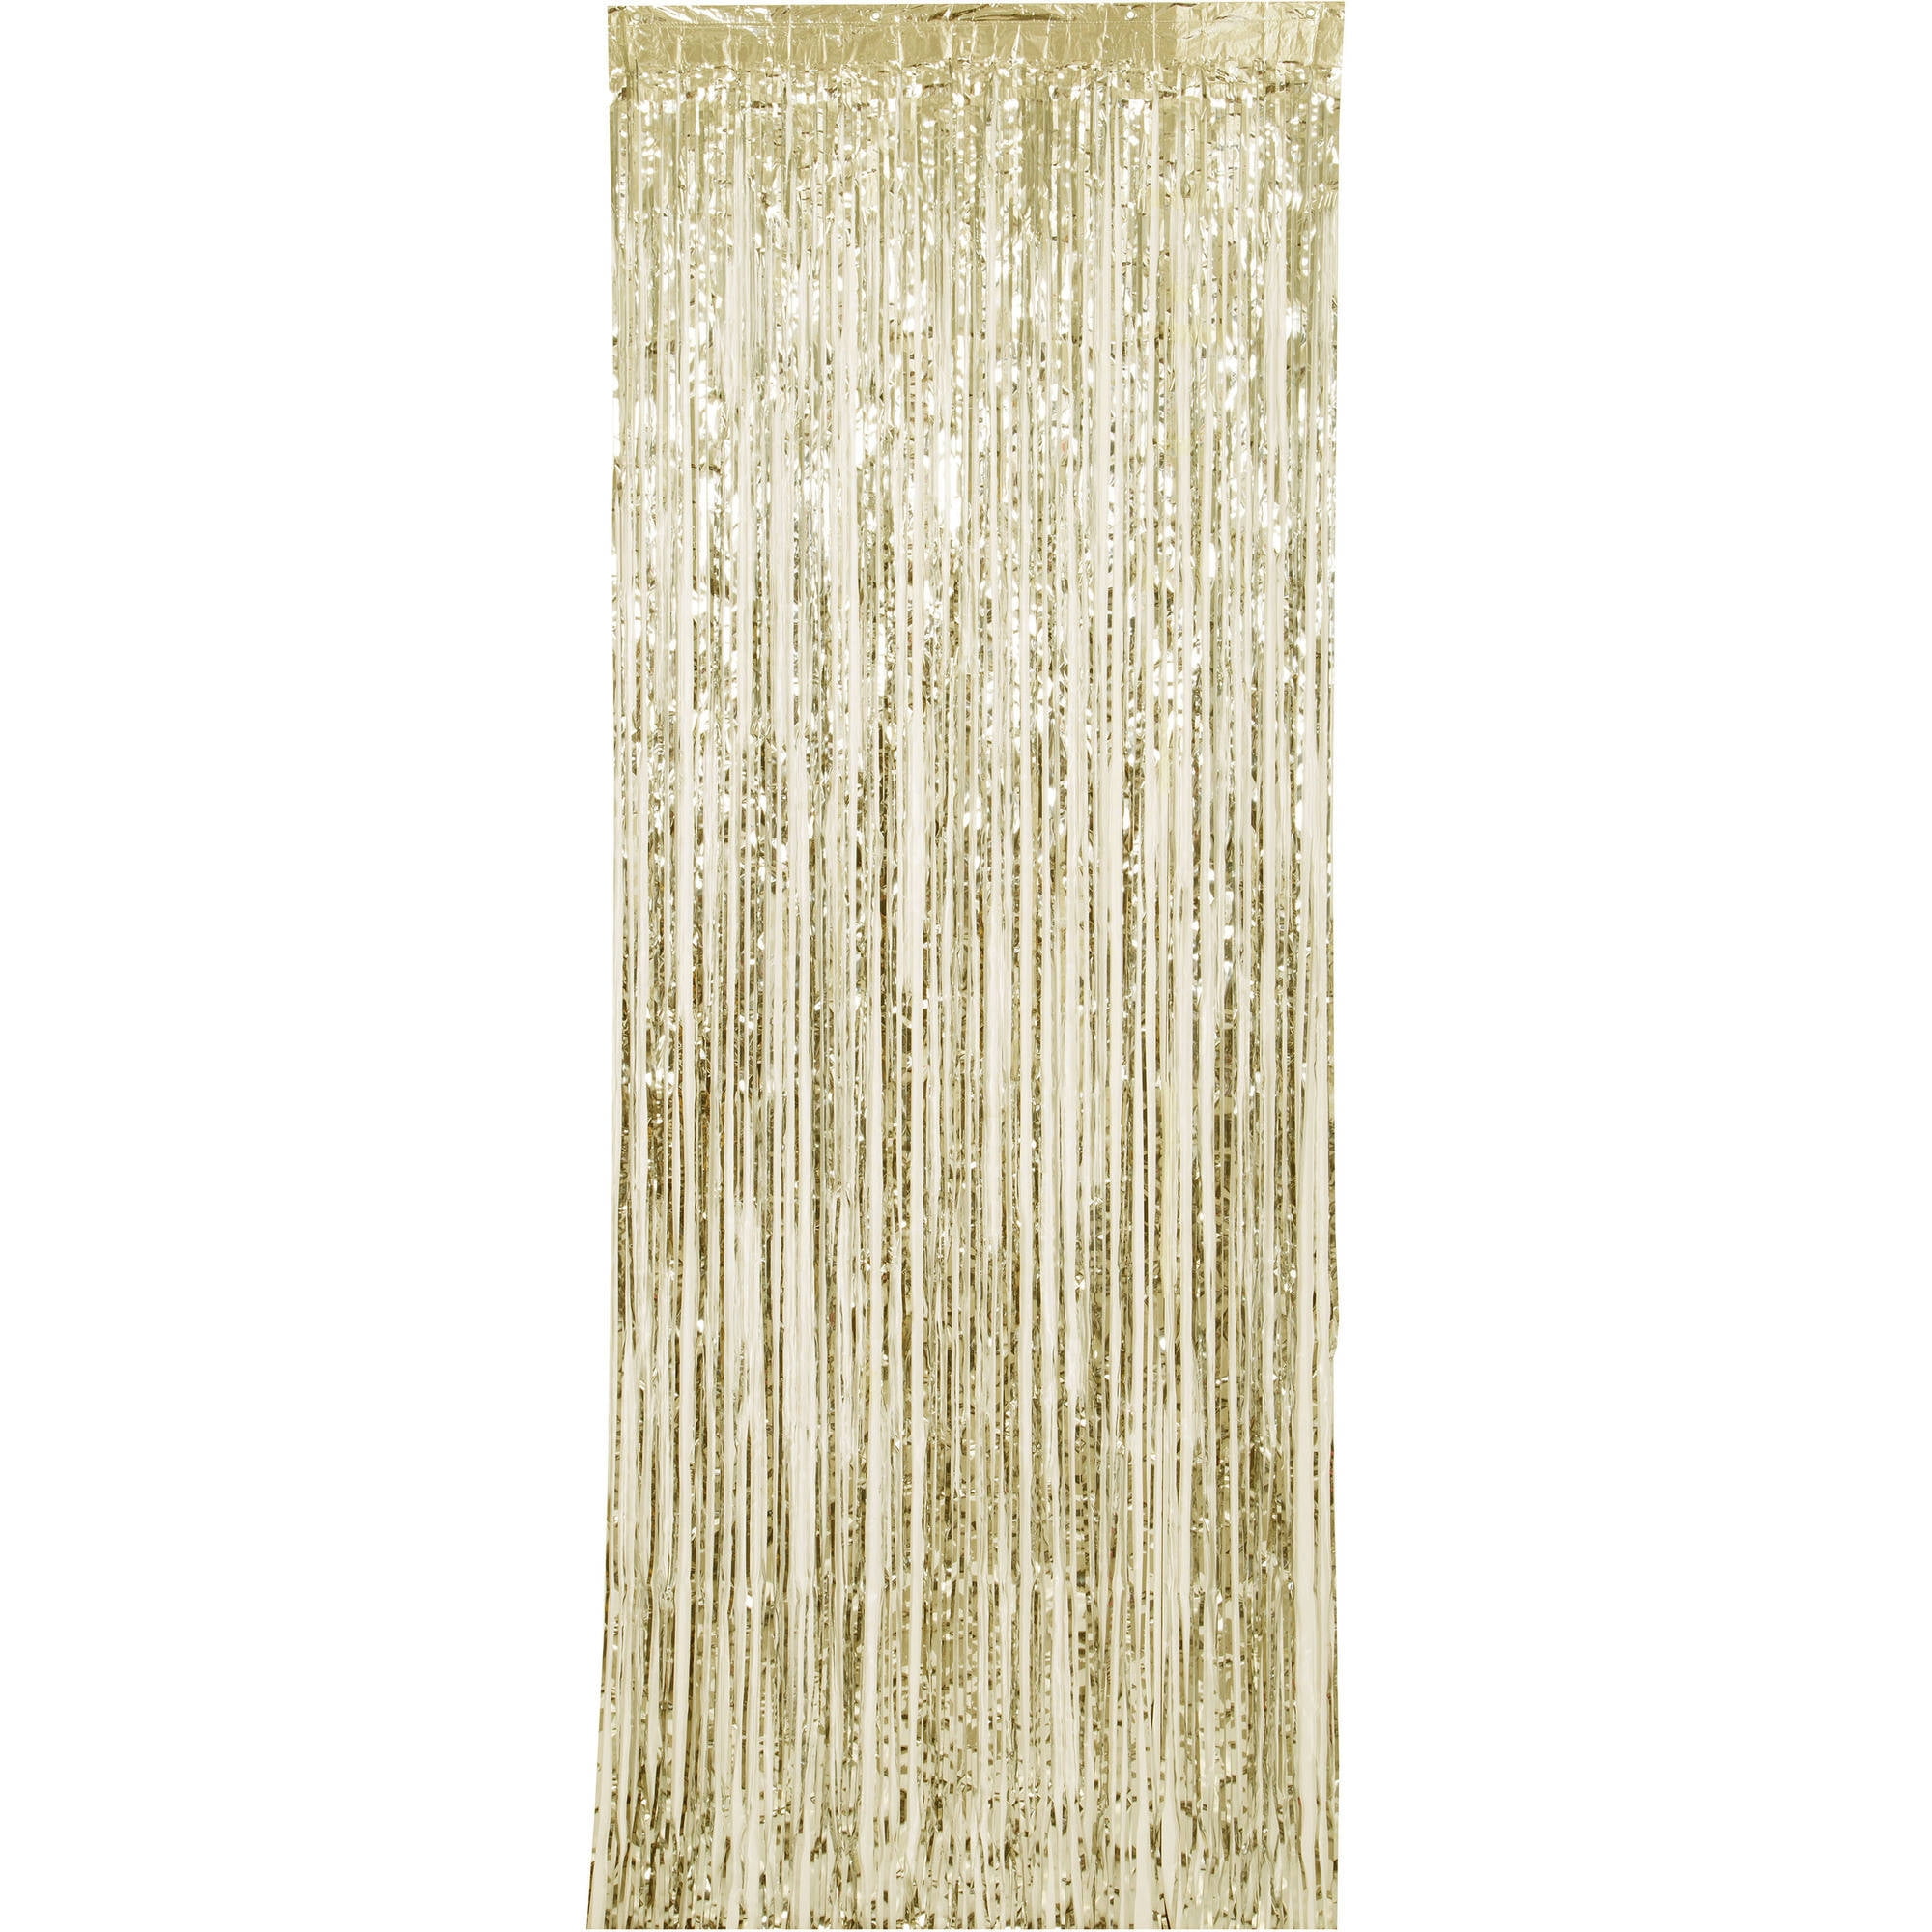 4 x Big//Large 3ft x 8ft Silver Fringe Foil Curtain party tassel You will receive 4 curtains